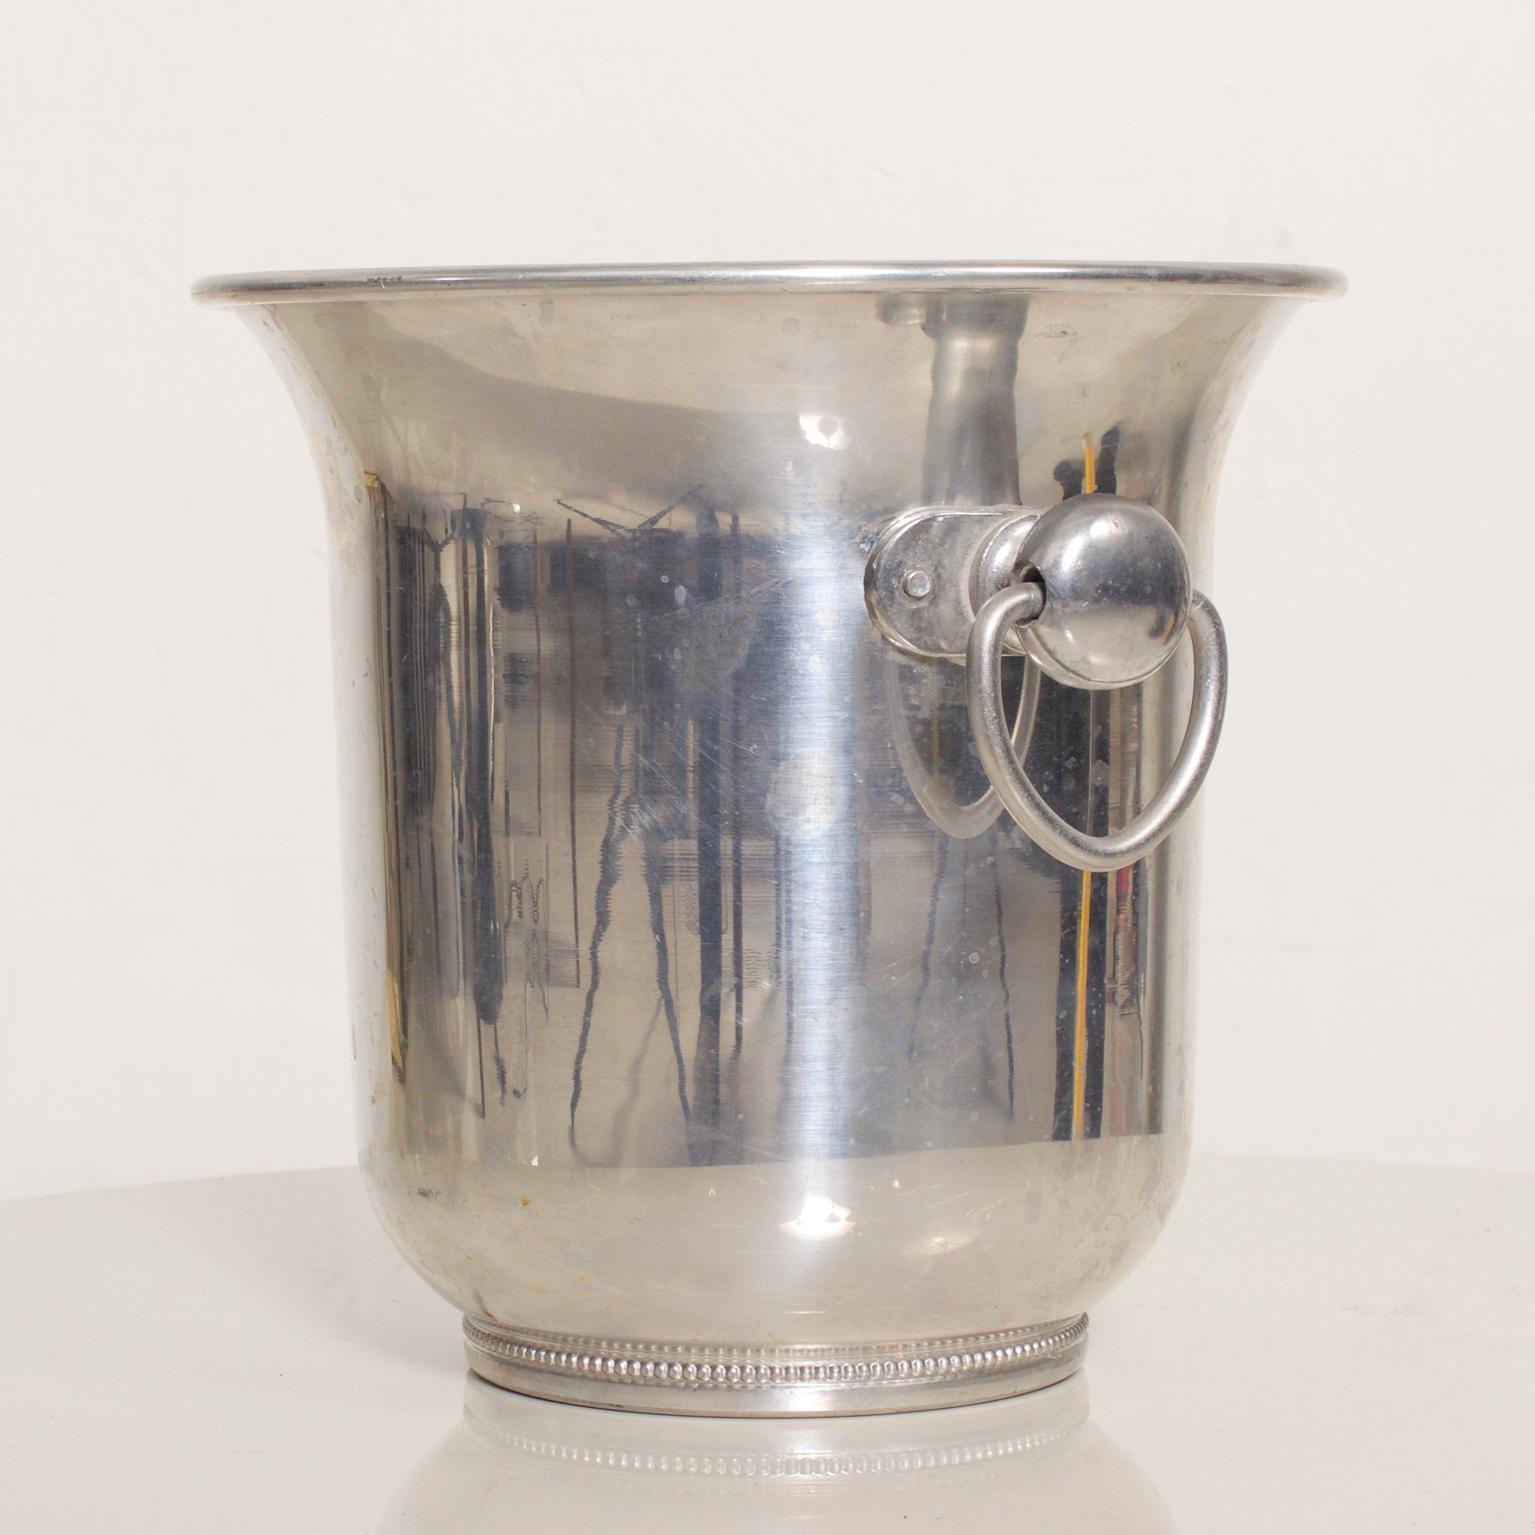 For your pleasure: Vintage Mid-Century Modern Champagne bucket, wine cooler, ice bucket from France stamped MOD Meaux Argit, made in France
Measures: 8 3/4